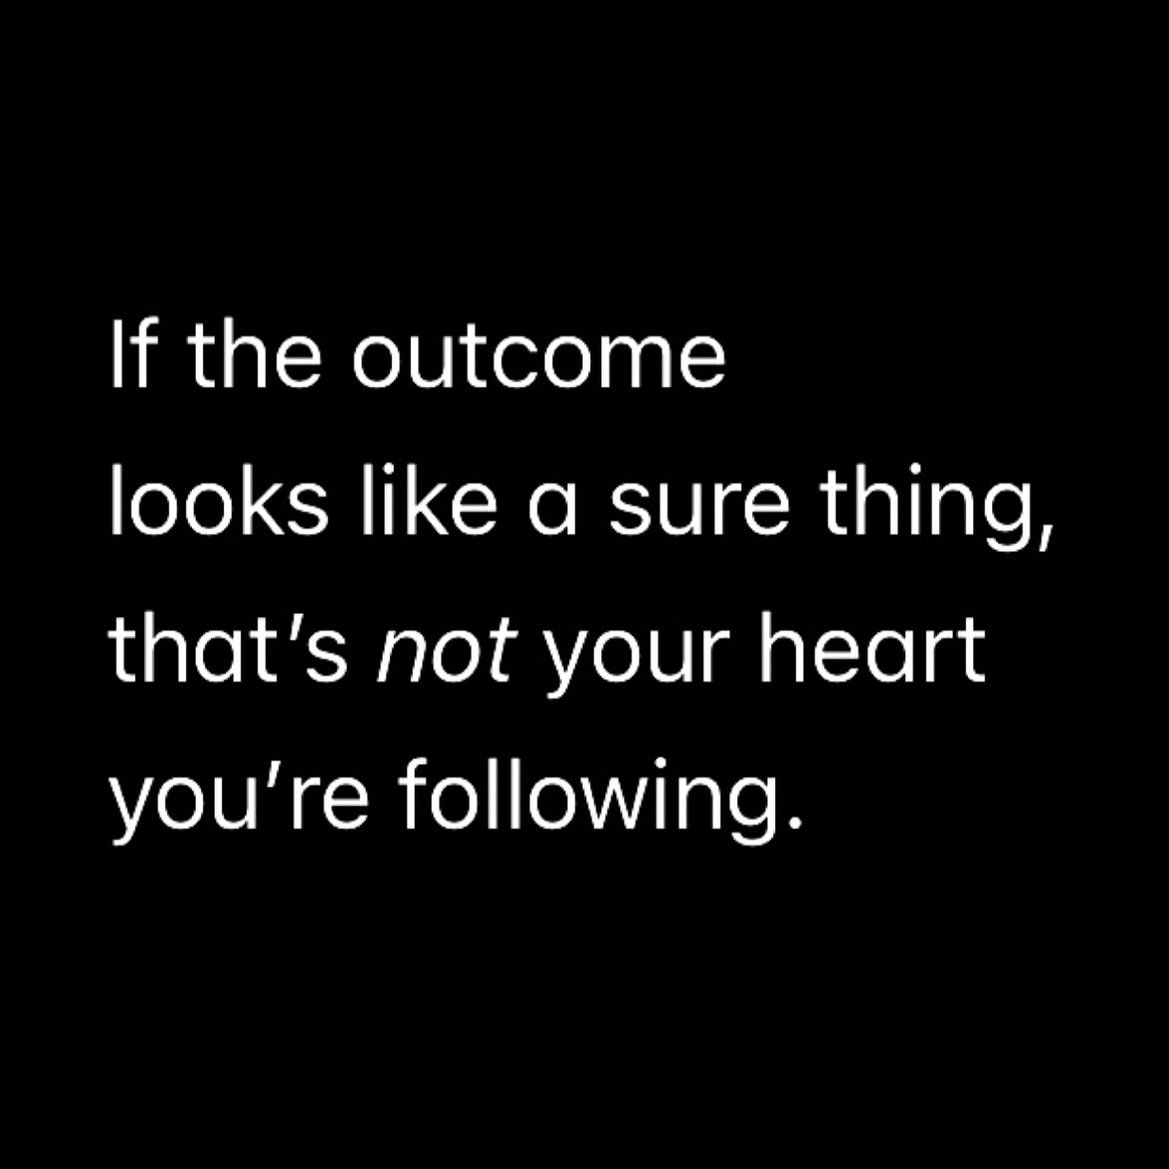 If the outcome looks certain, but it doesn&rsquo;t quite feel right inside, you&rsquo;re not following your heart. 

You&rsquo;re playing it safe.

There&rsquo;s nothing inherently &ldquo;wrong&rdquo; or &ldquo;bad&rdquo; with playing it safe, 

So l